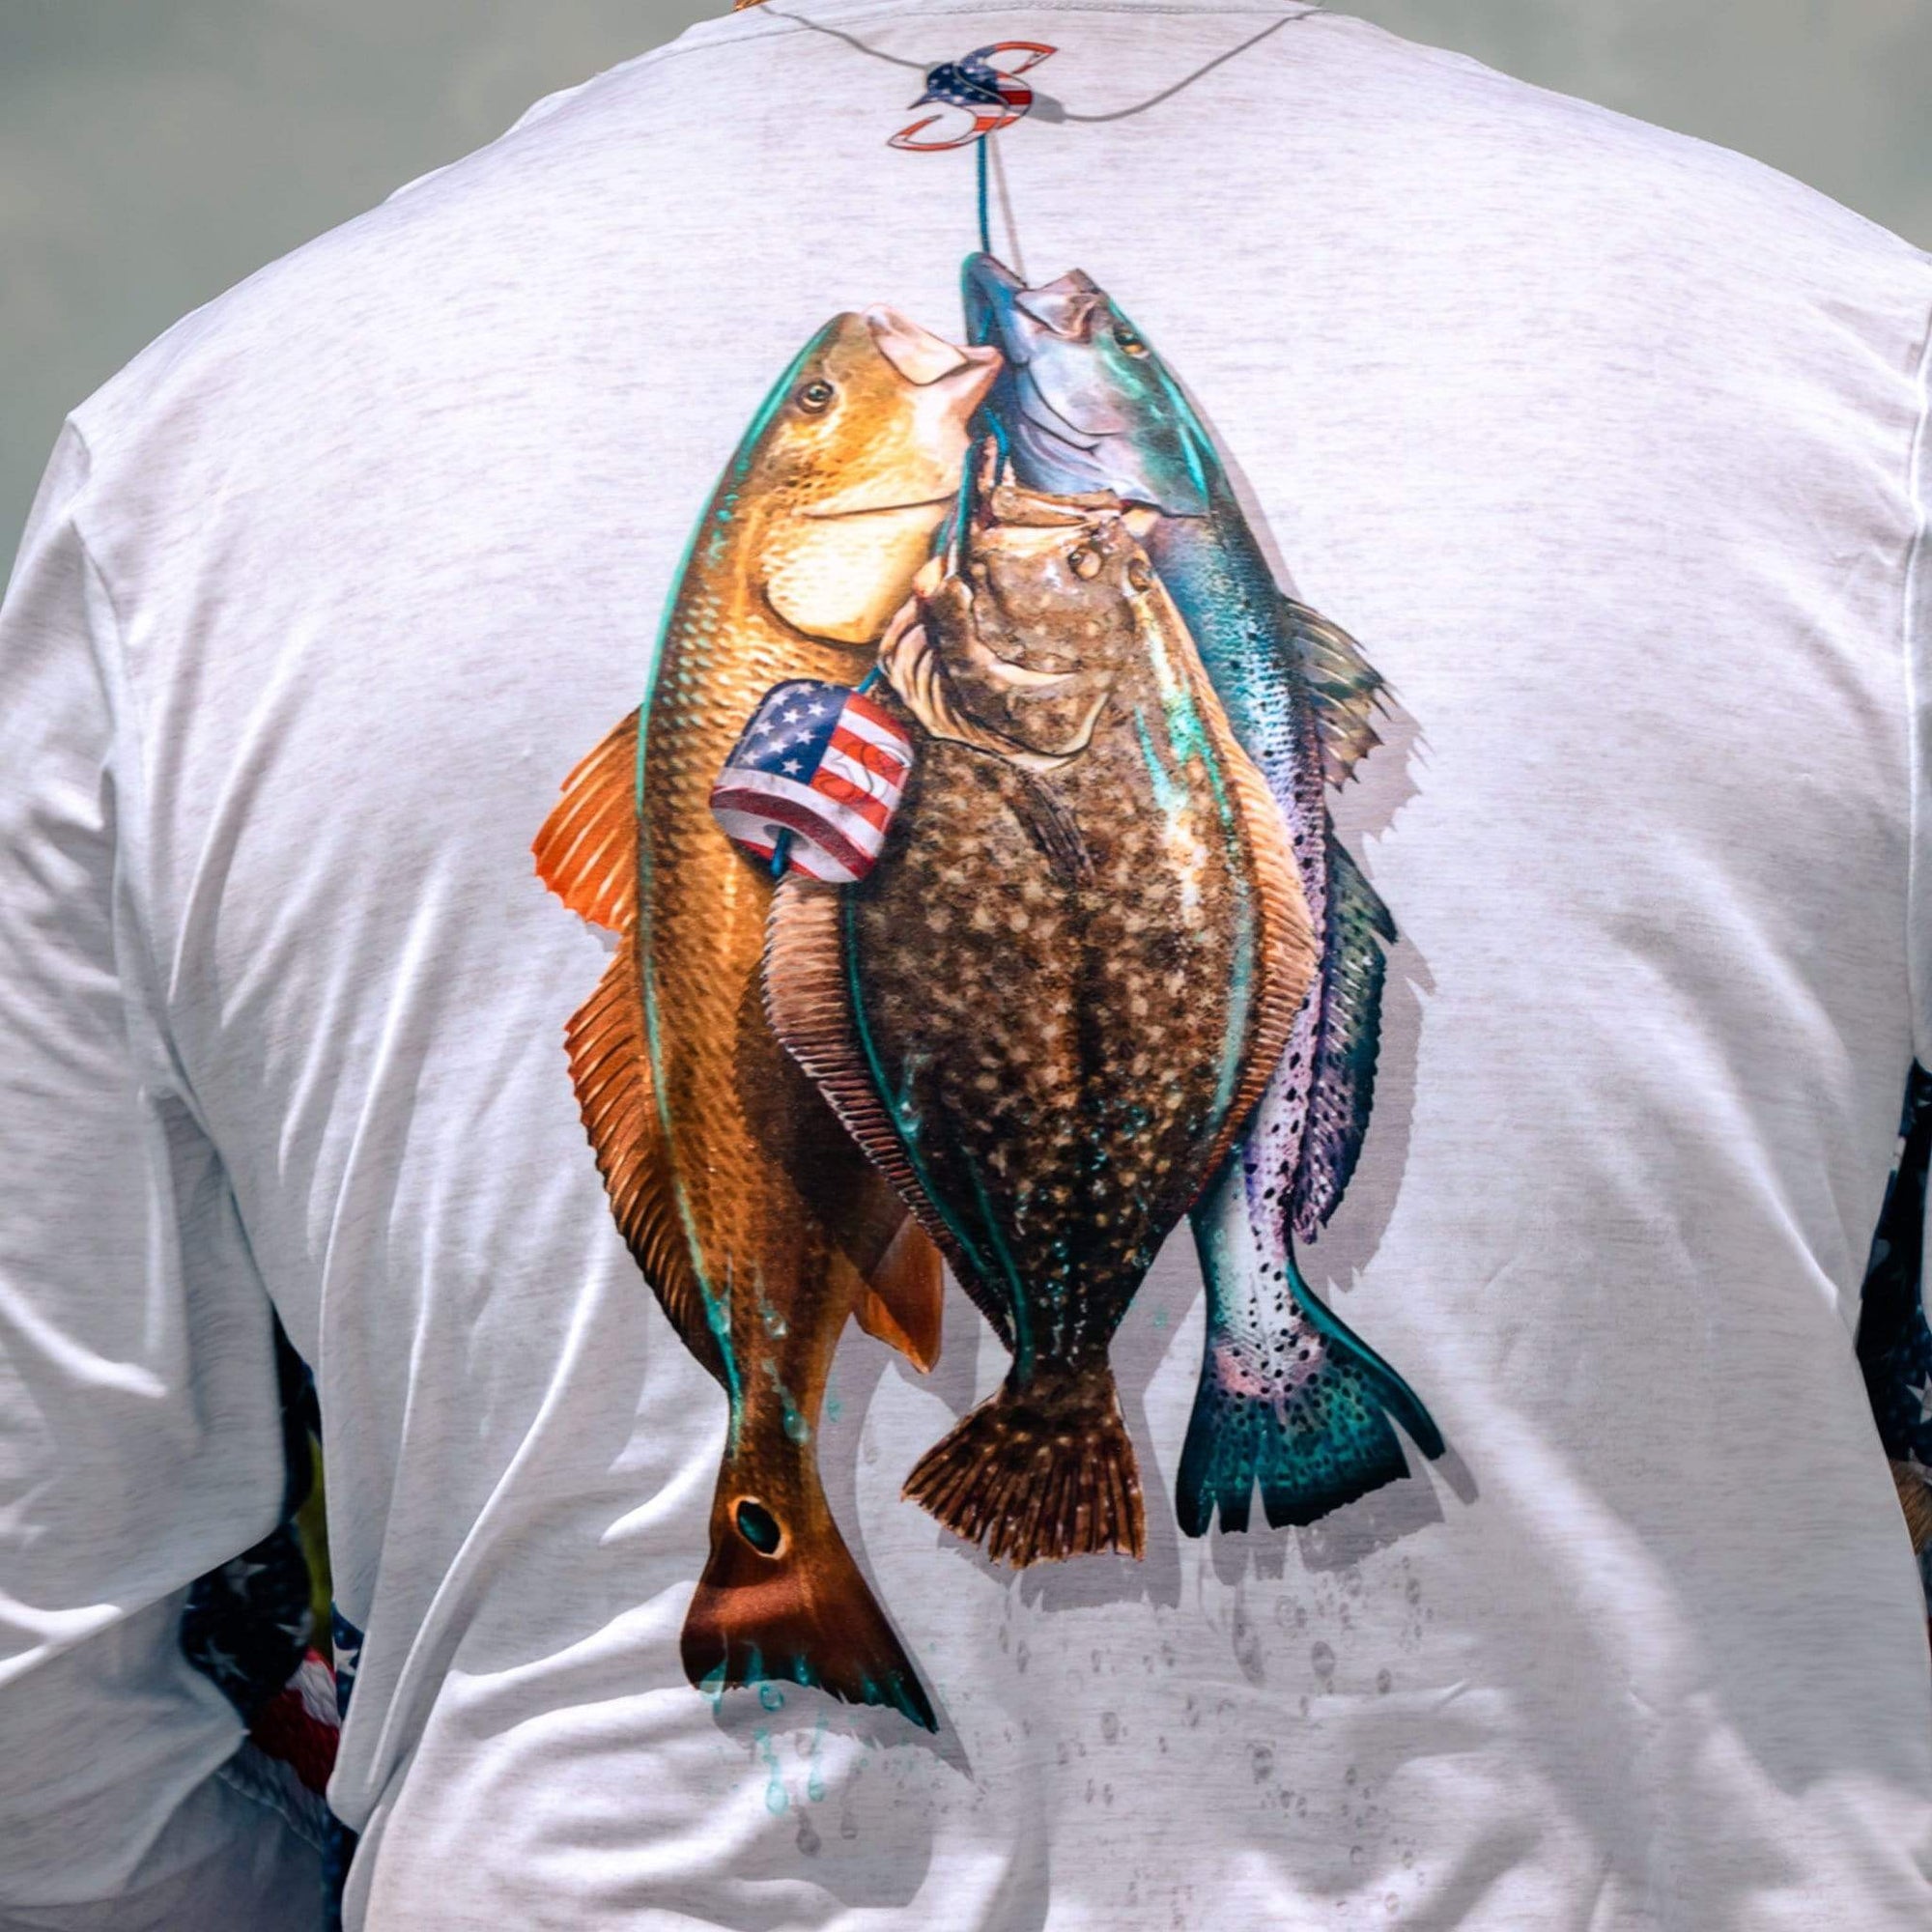 American Flag Stringer Redfish, Trout & Flounder Long Sleeve Fishing Shirt Youth Large,SaltyScales